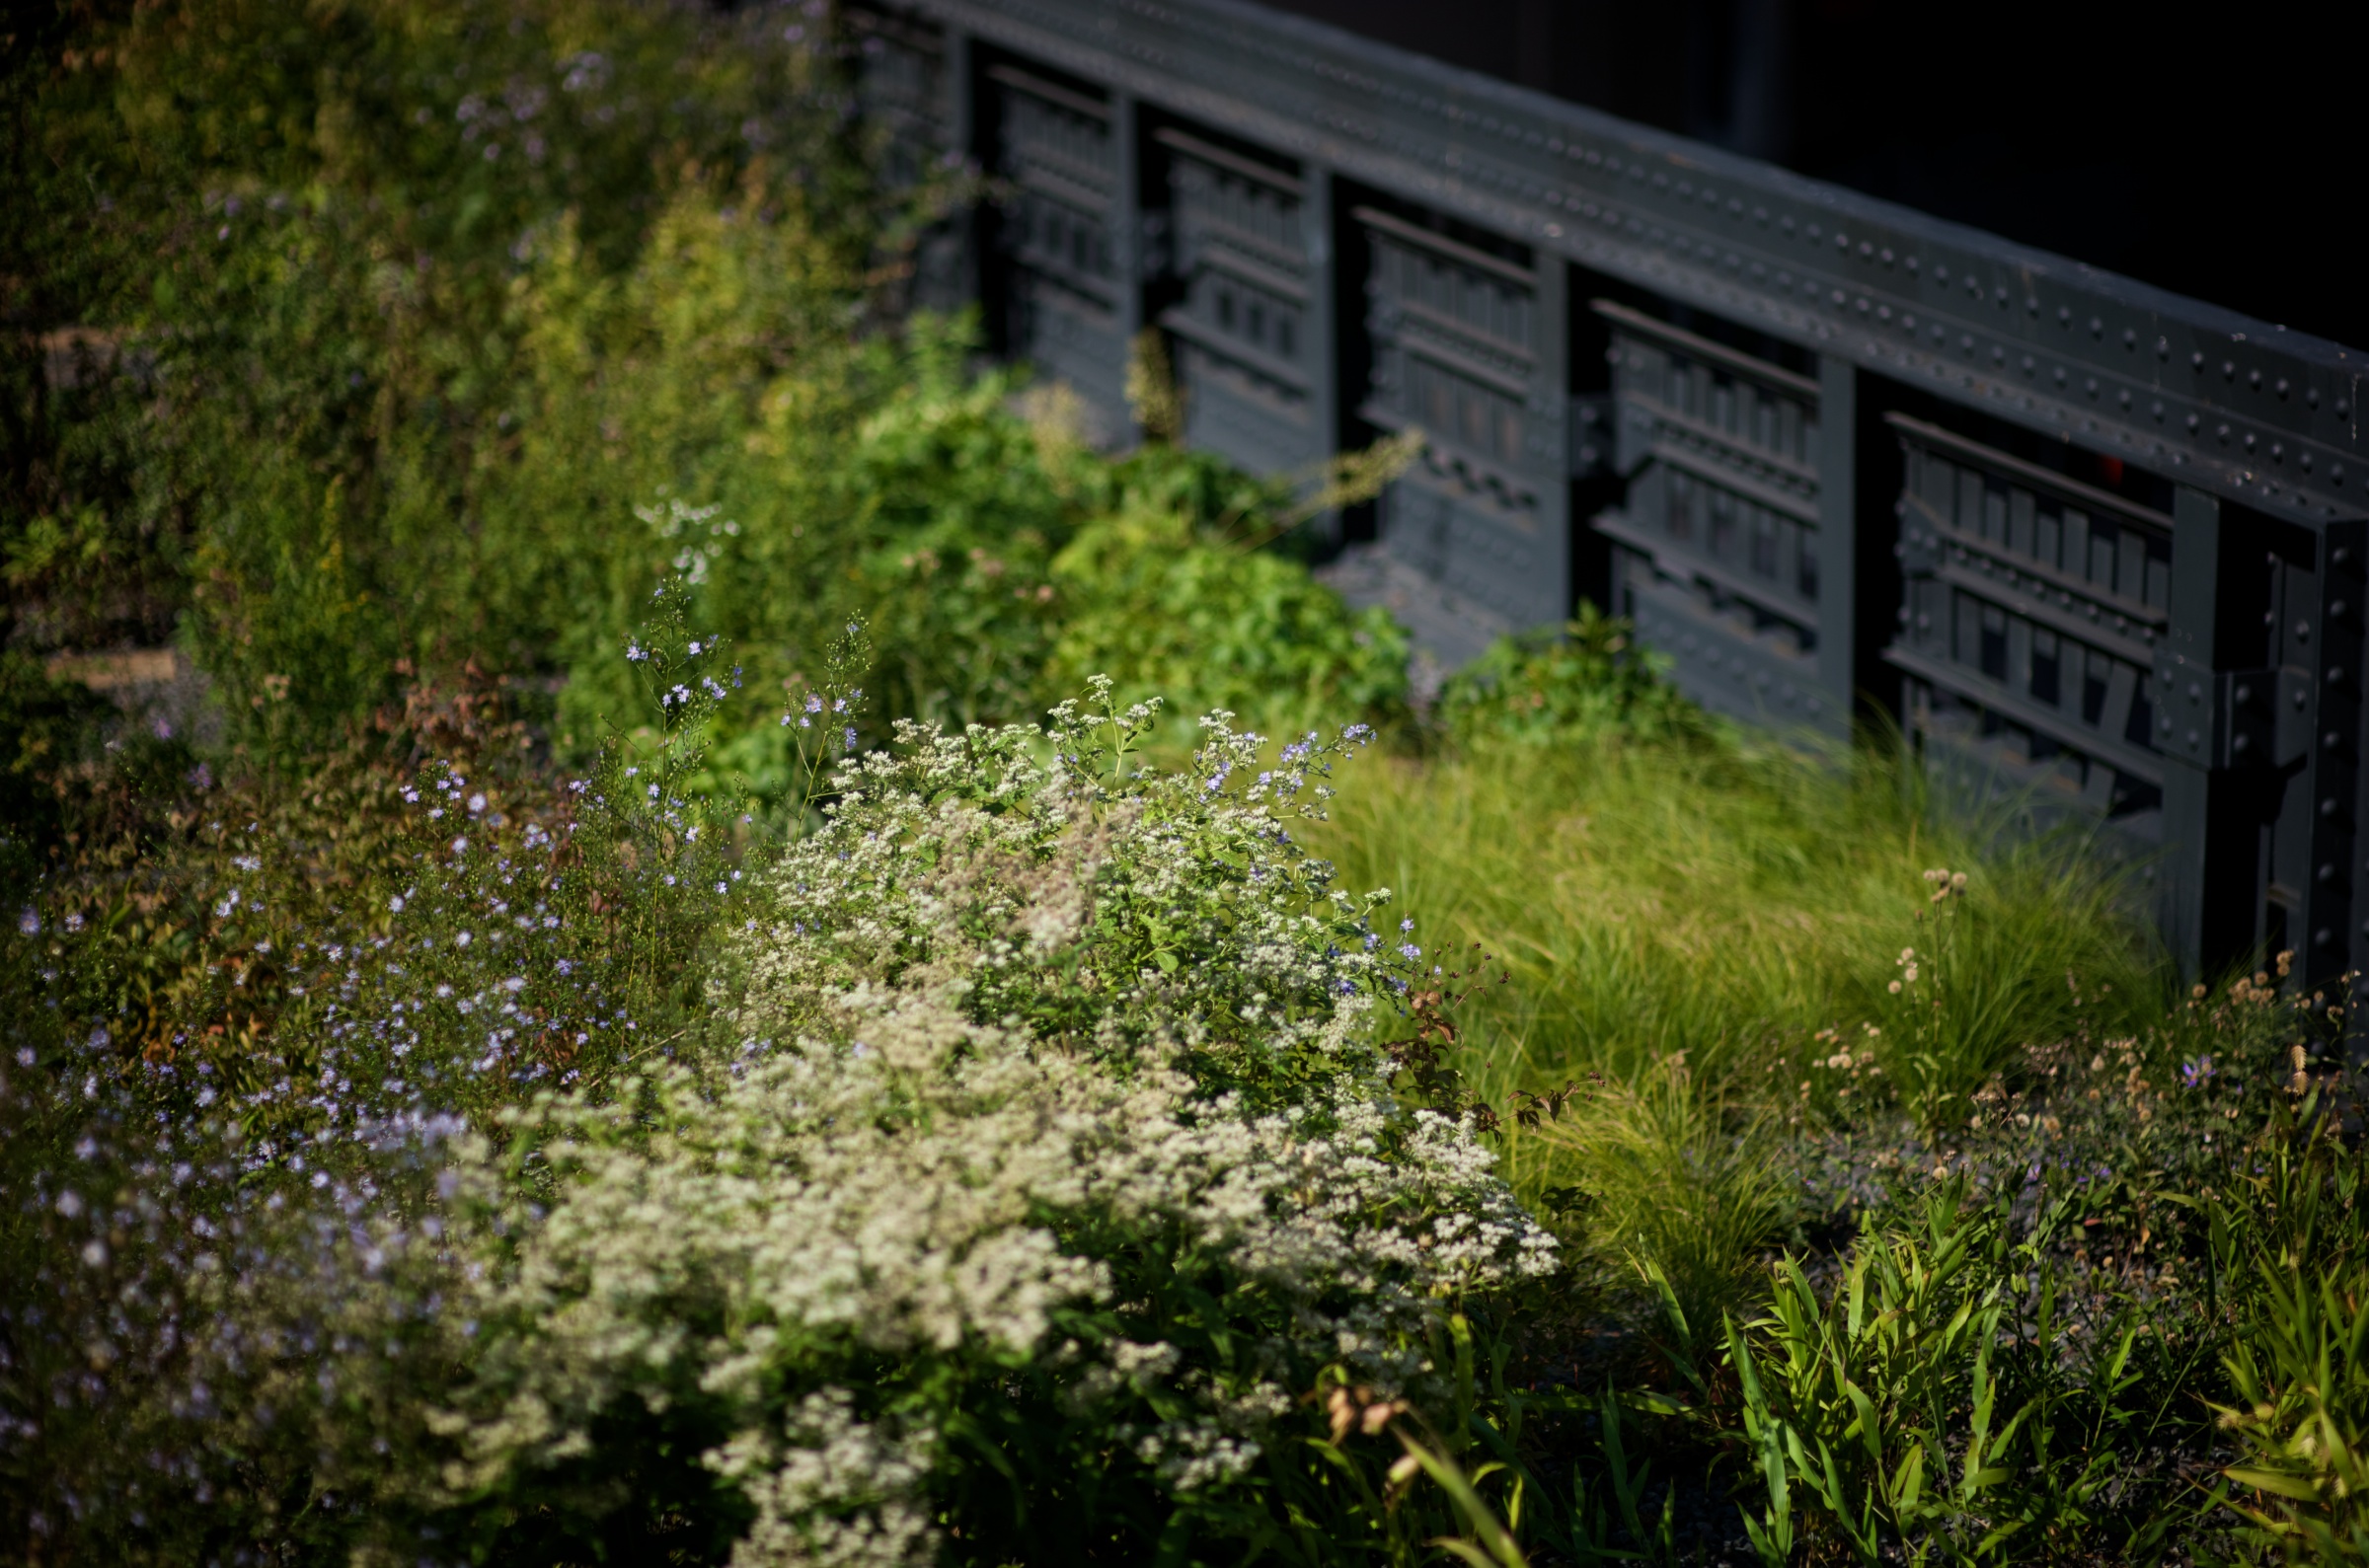 The High Line is located on Manhattan's West Side. It runs from Gansevoort Street in the Meatpacking District to 34th Street, between 10th & 11th Avenues. © mark menditto